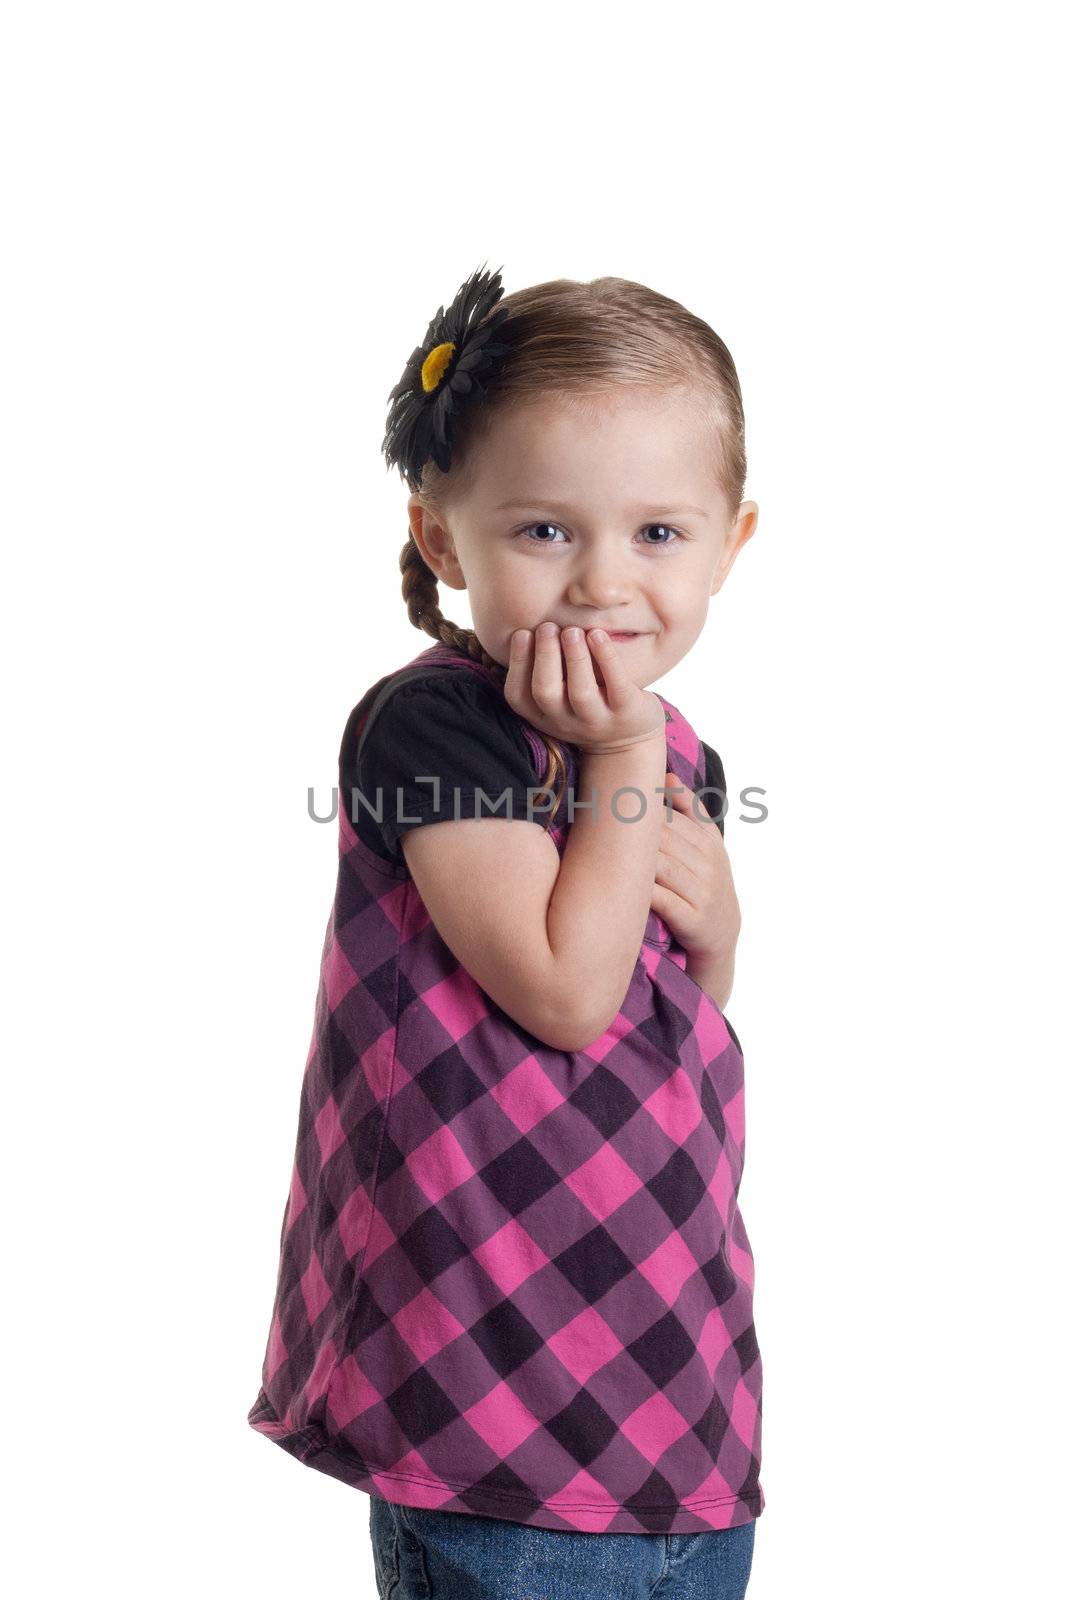 An adorable young toddler girl standing with her hand under her chin.